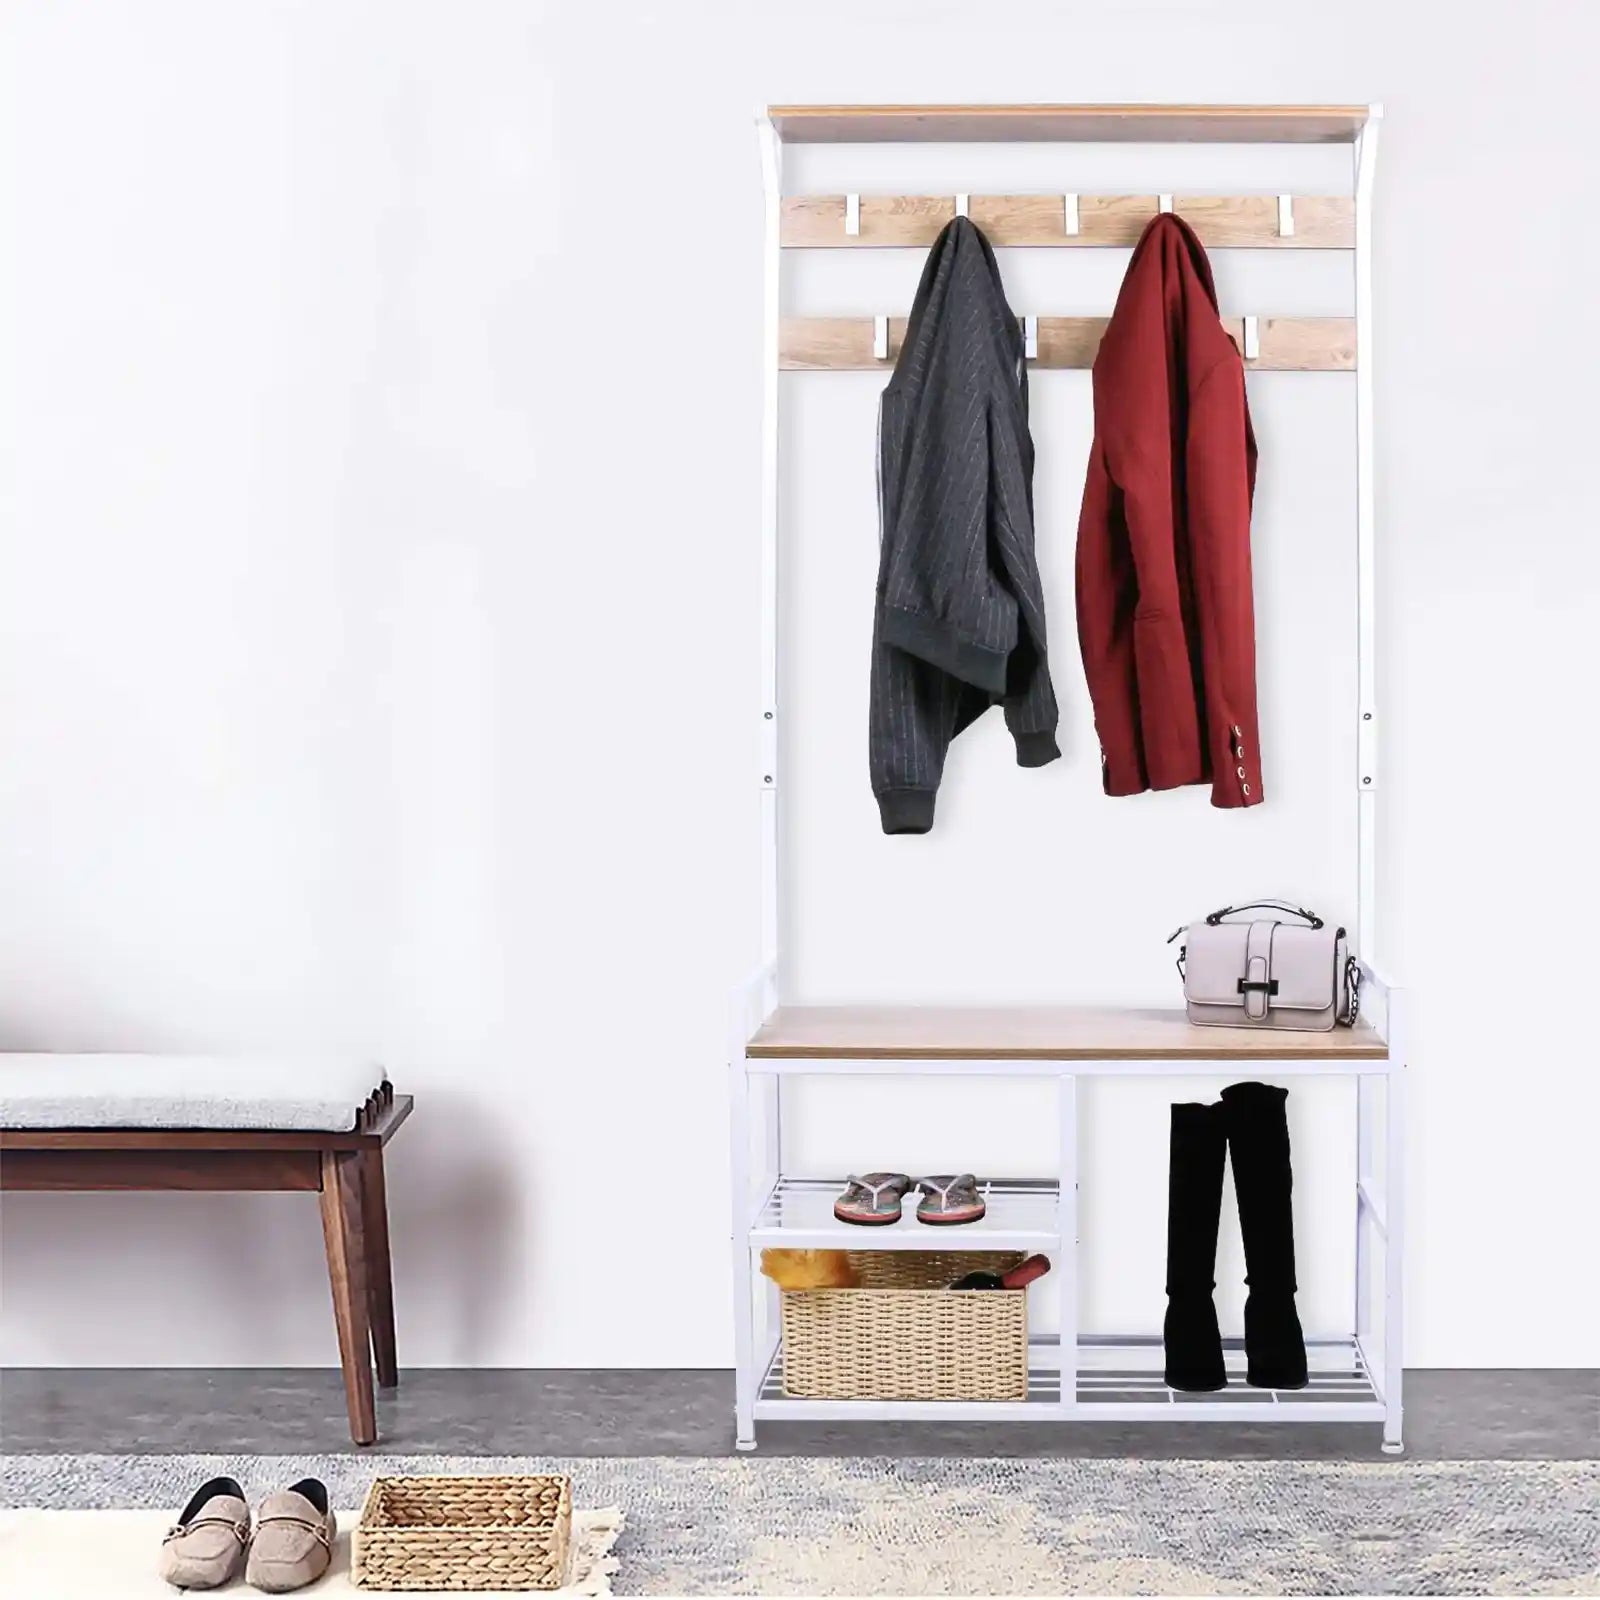 Coat Rack Shoe Bench, Hall Tree Entryway Storage Bench, Wood Look Accent Furniture with Metal Frame, 3-in-1 Design